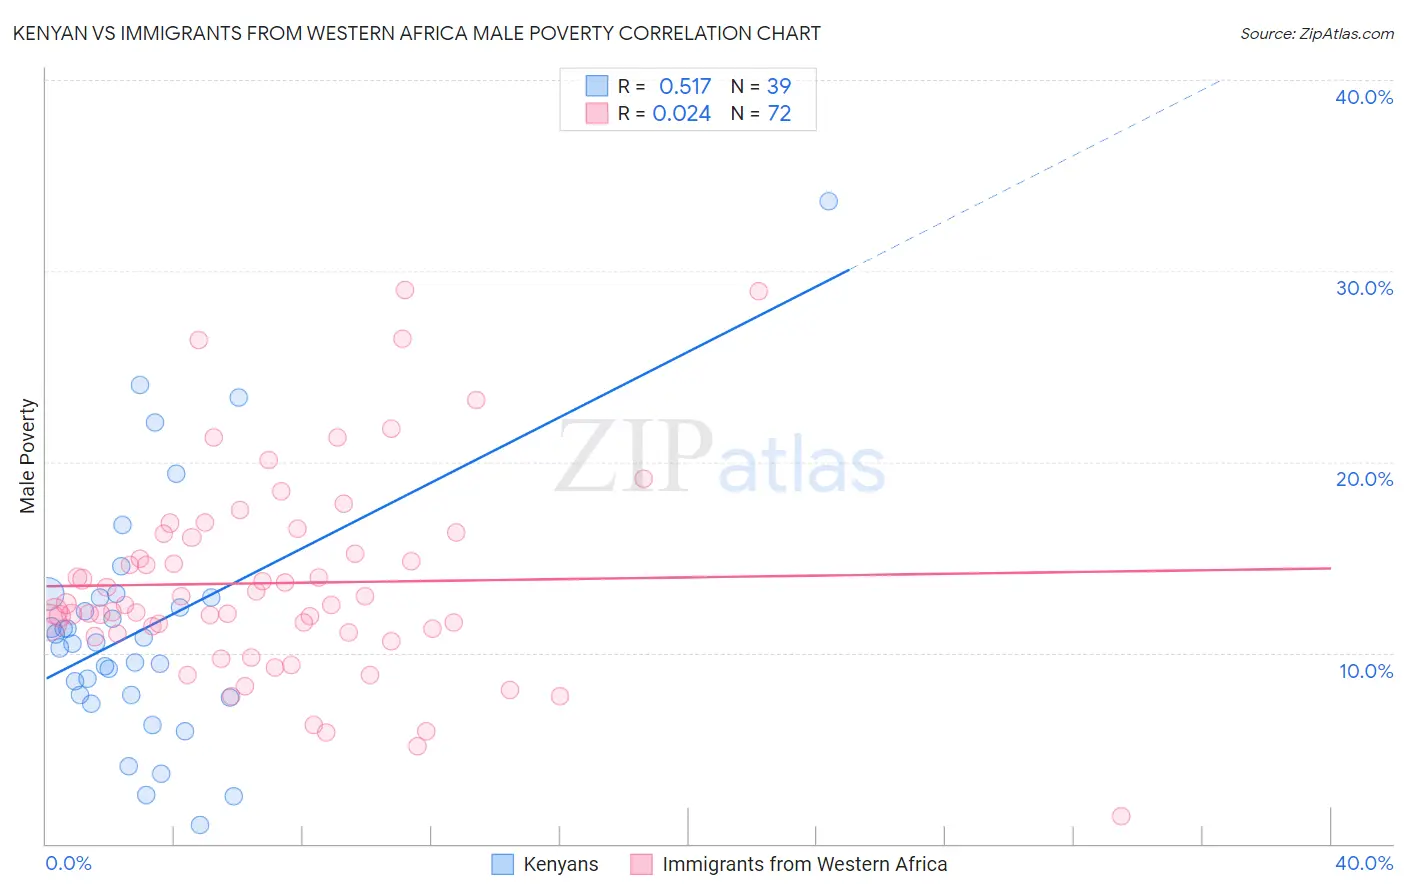 Kenyan vs Immigrants from Western Africa Male Poverty